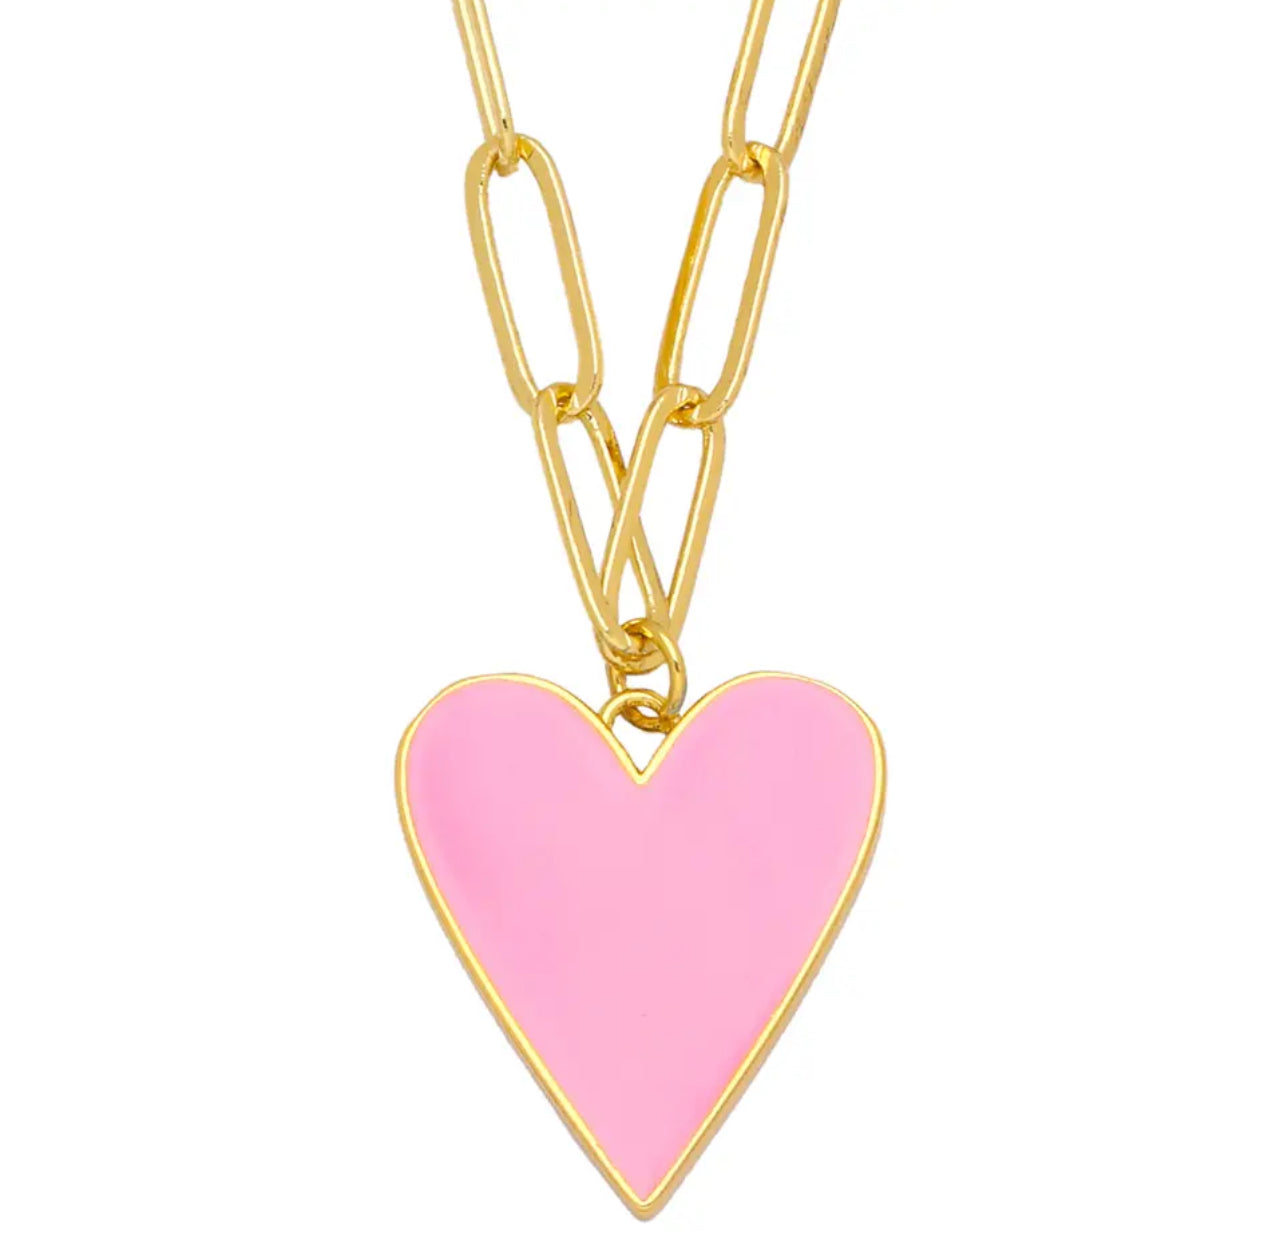 Necklace pink heart gold plated